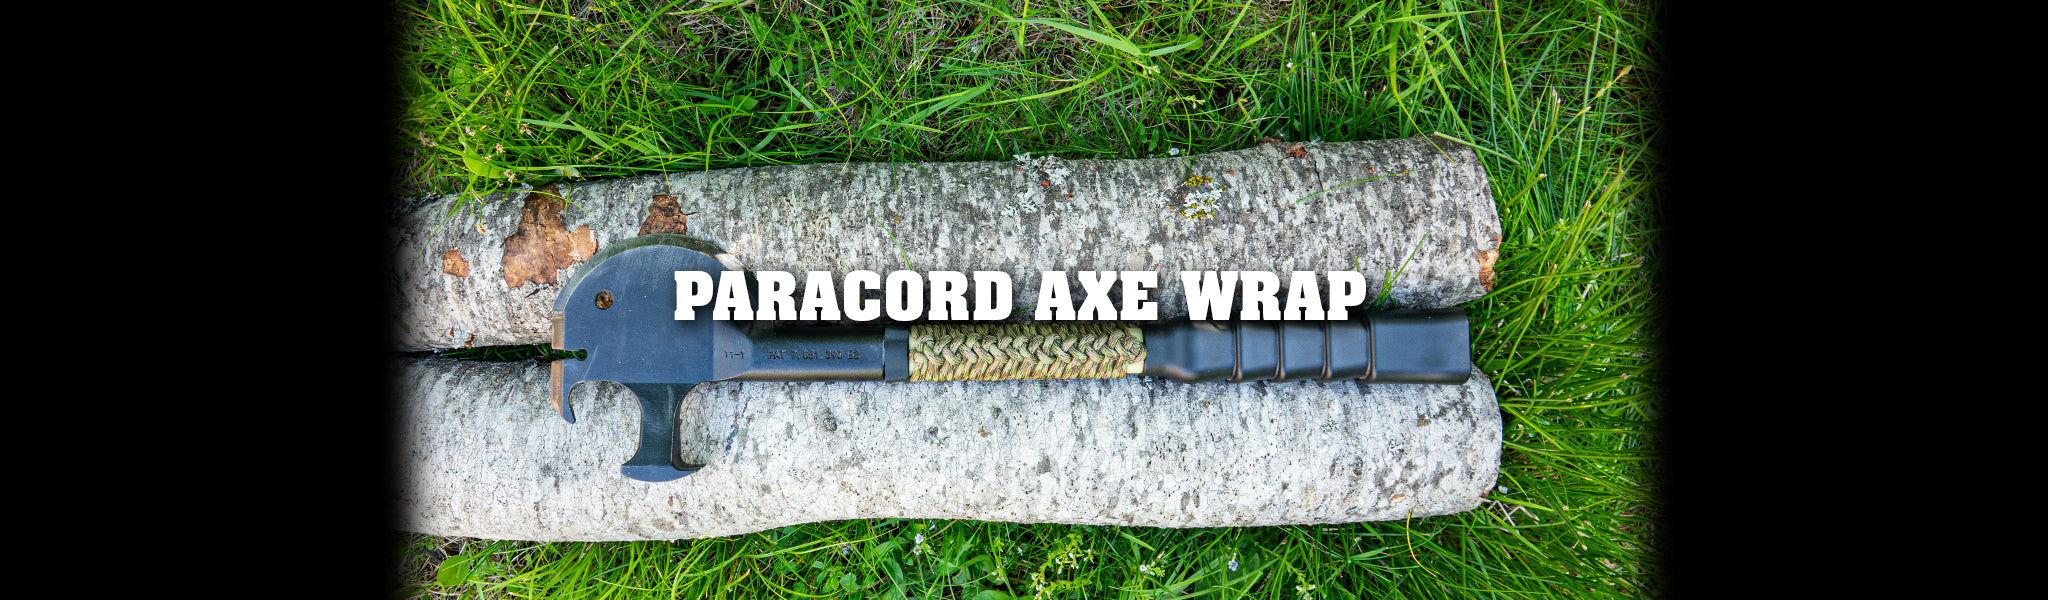 Paracord Handle Wrap For Axes